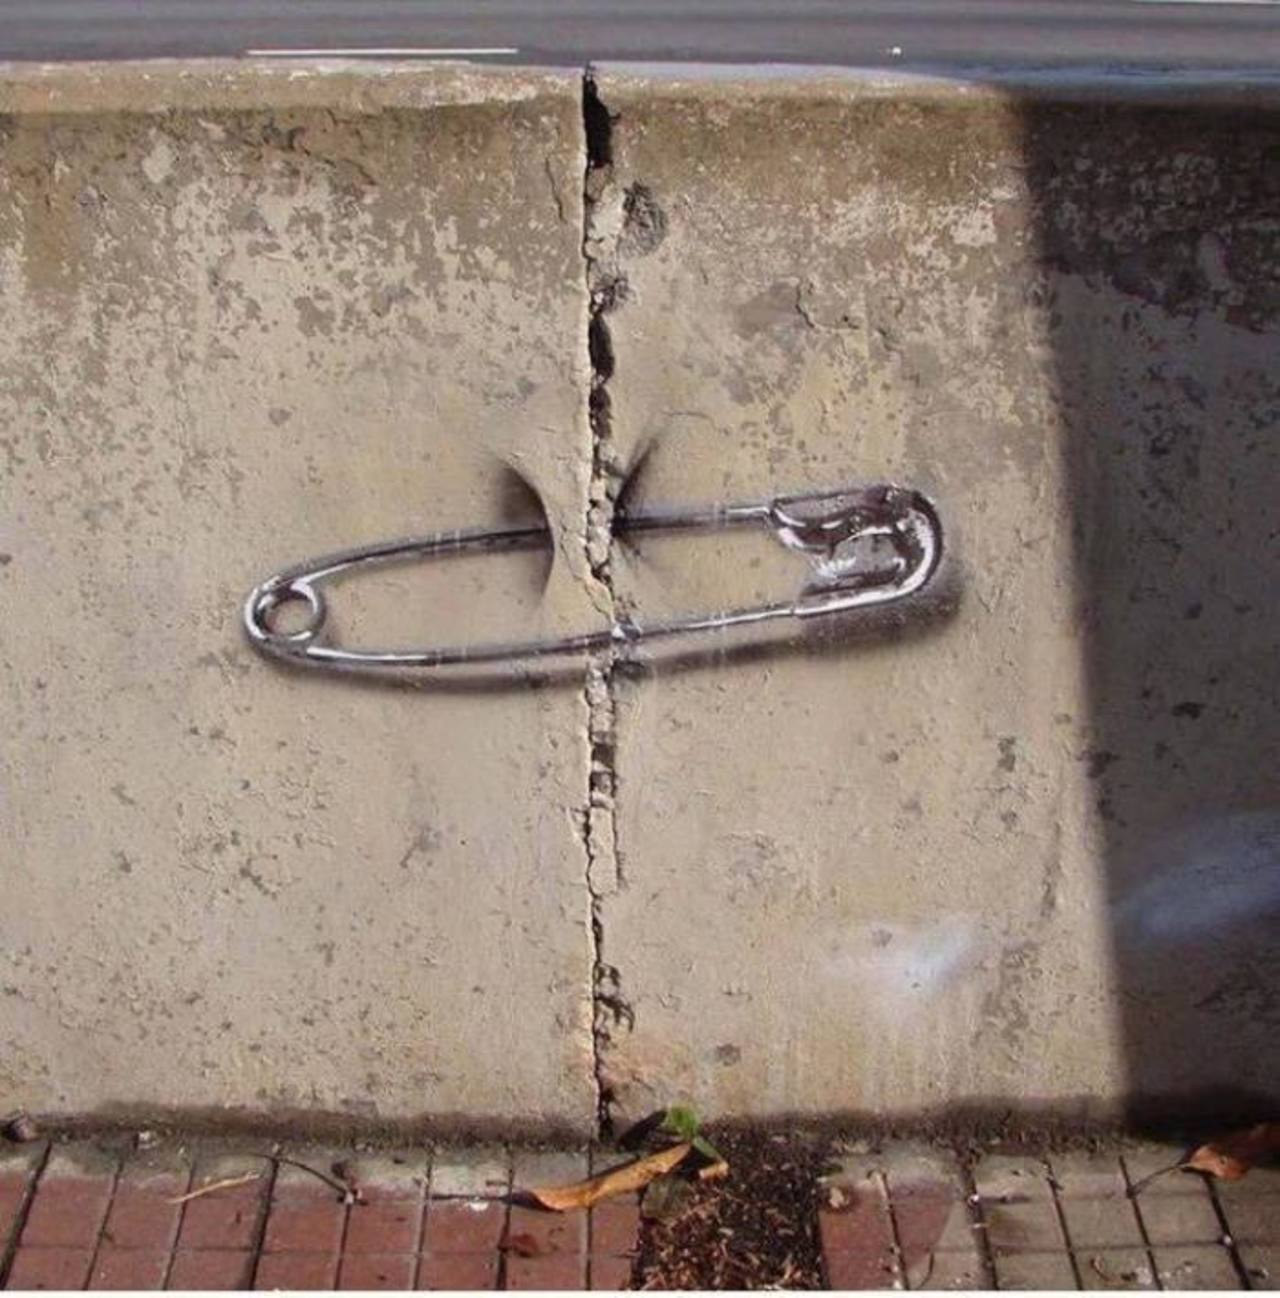 Simple & Beauty – #Creative #Streetart | Be ▲rtist - Be ▲rt https://beartistbeart.com/2016/08/25/simple-beauty-creative-streetart/?utm_campaign=crowdfire&utm_content=crowdfire&utm_medium=social&utm_source=twitter https://t.co/rsvfOsJPpw